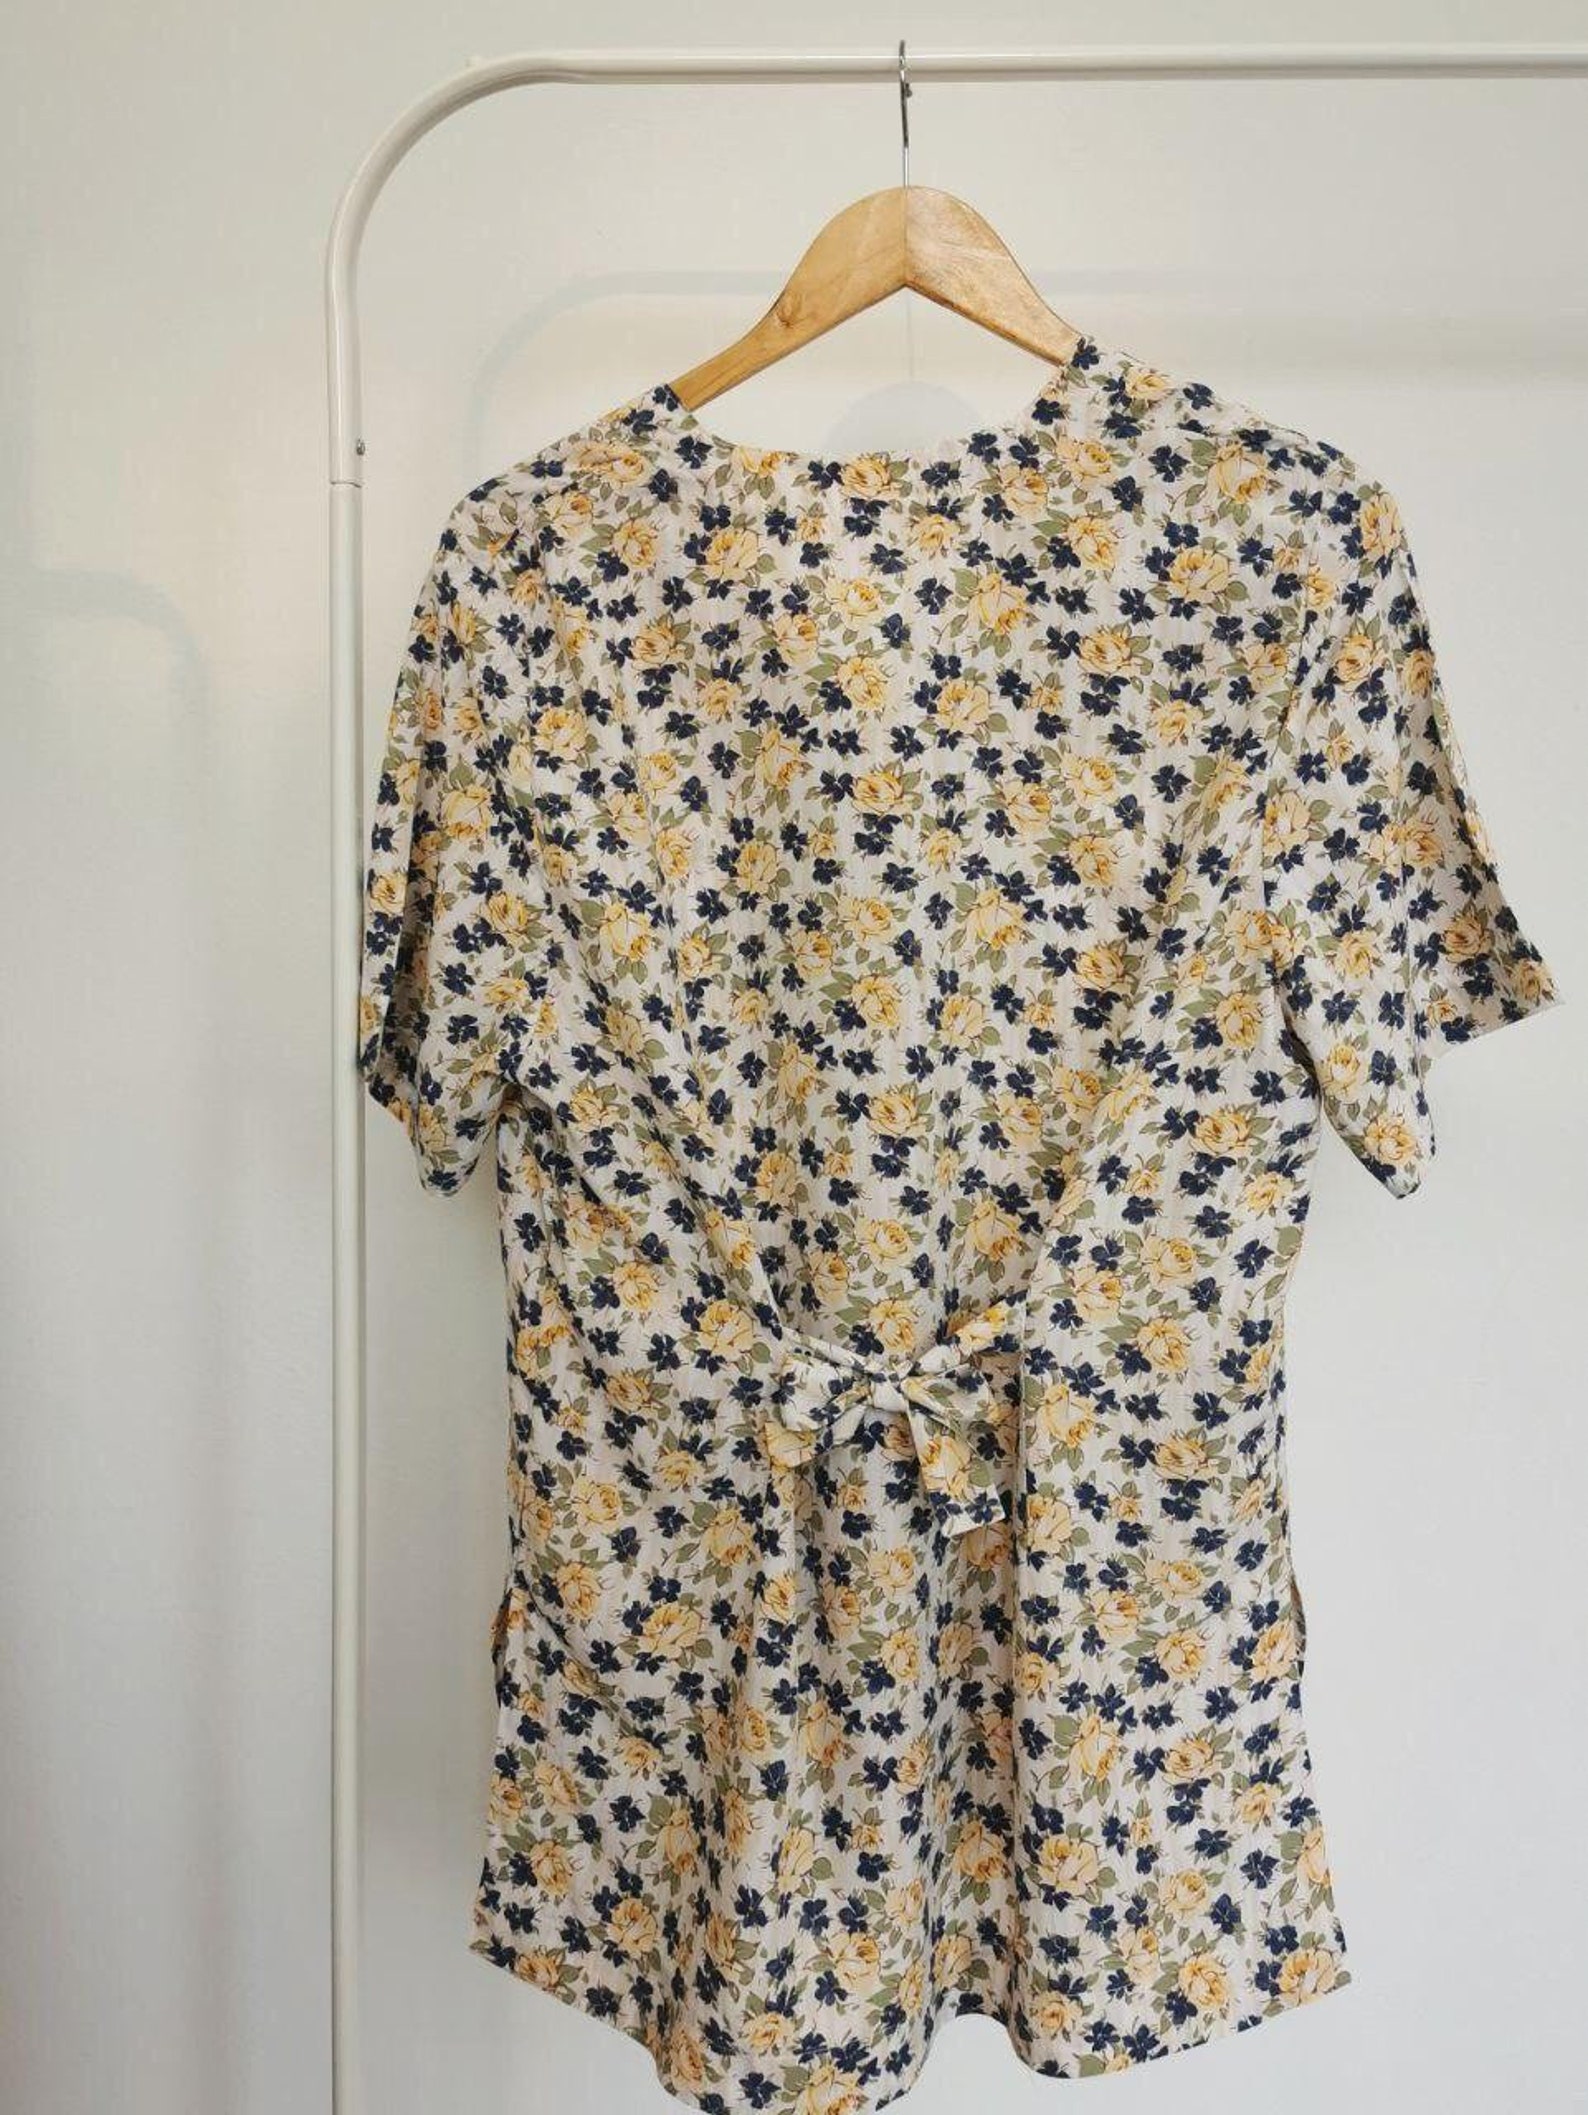 Floral shirt by Michel Valerie | Etsy